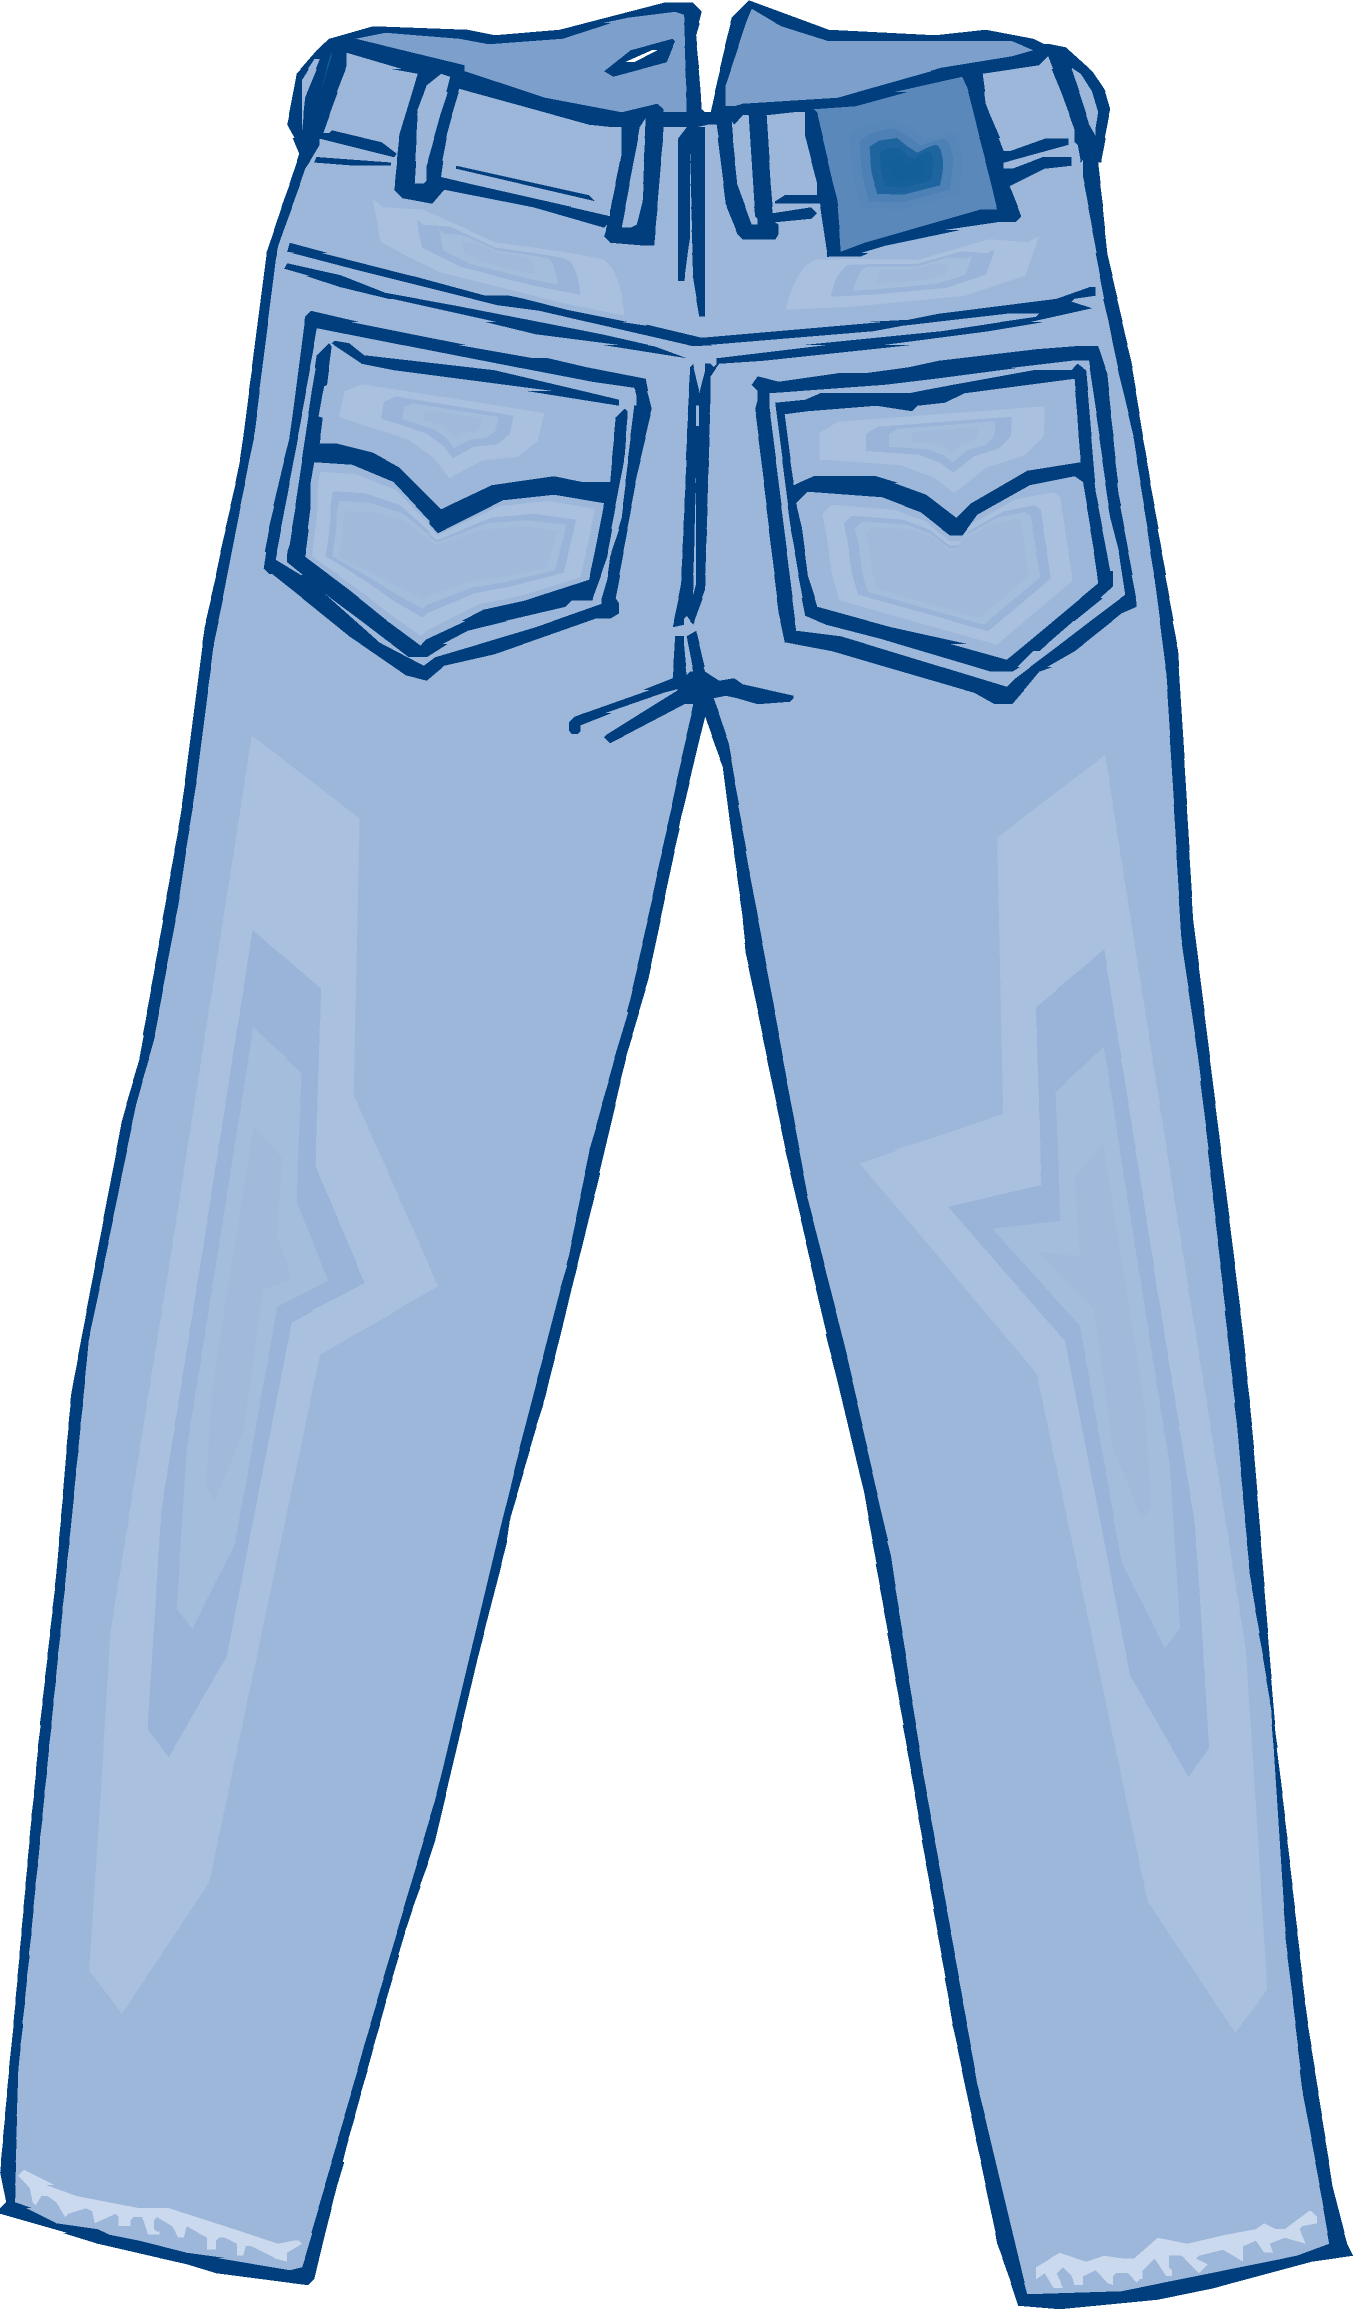 Mens pants cliparts free download clip art on png